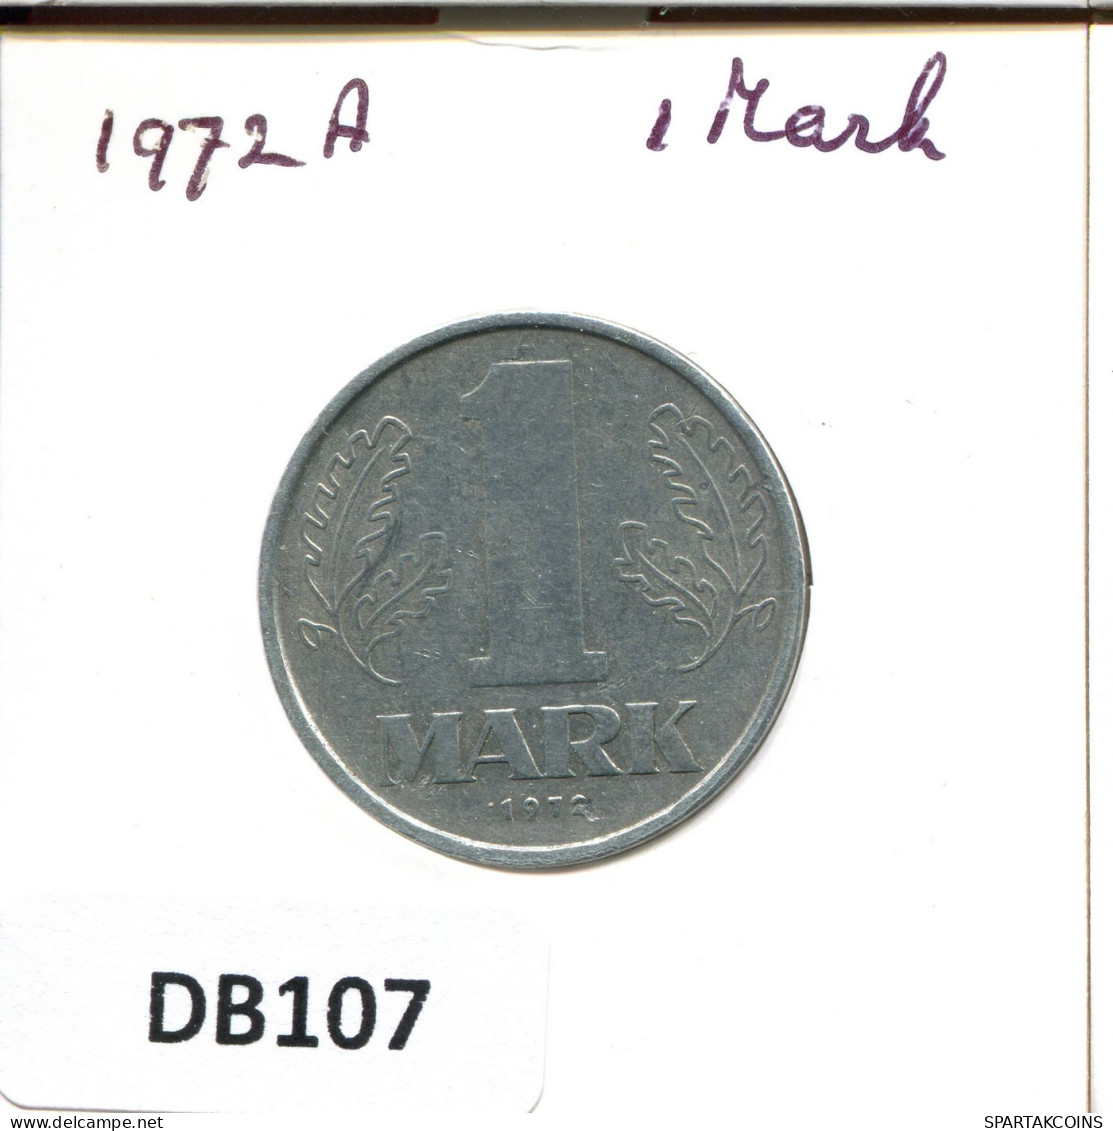 1 MARK 1972 A DDR EAST ALLEMAGNE Pièce GERMANY #DB107.F.A - 1 Mark